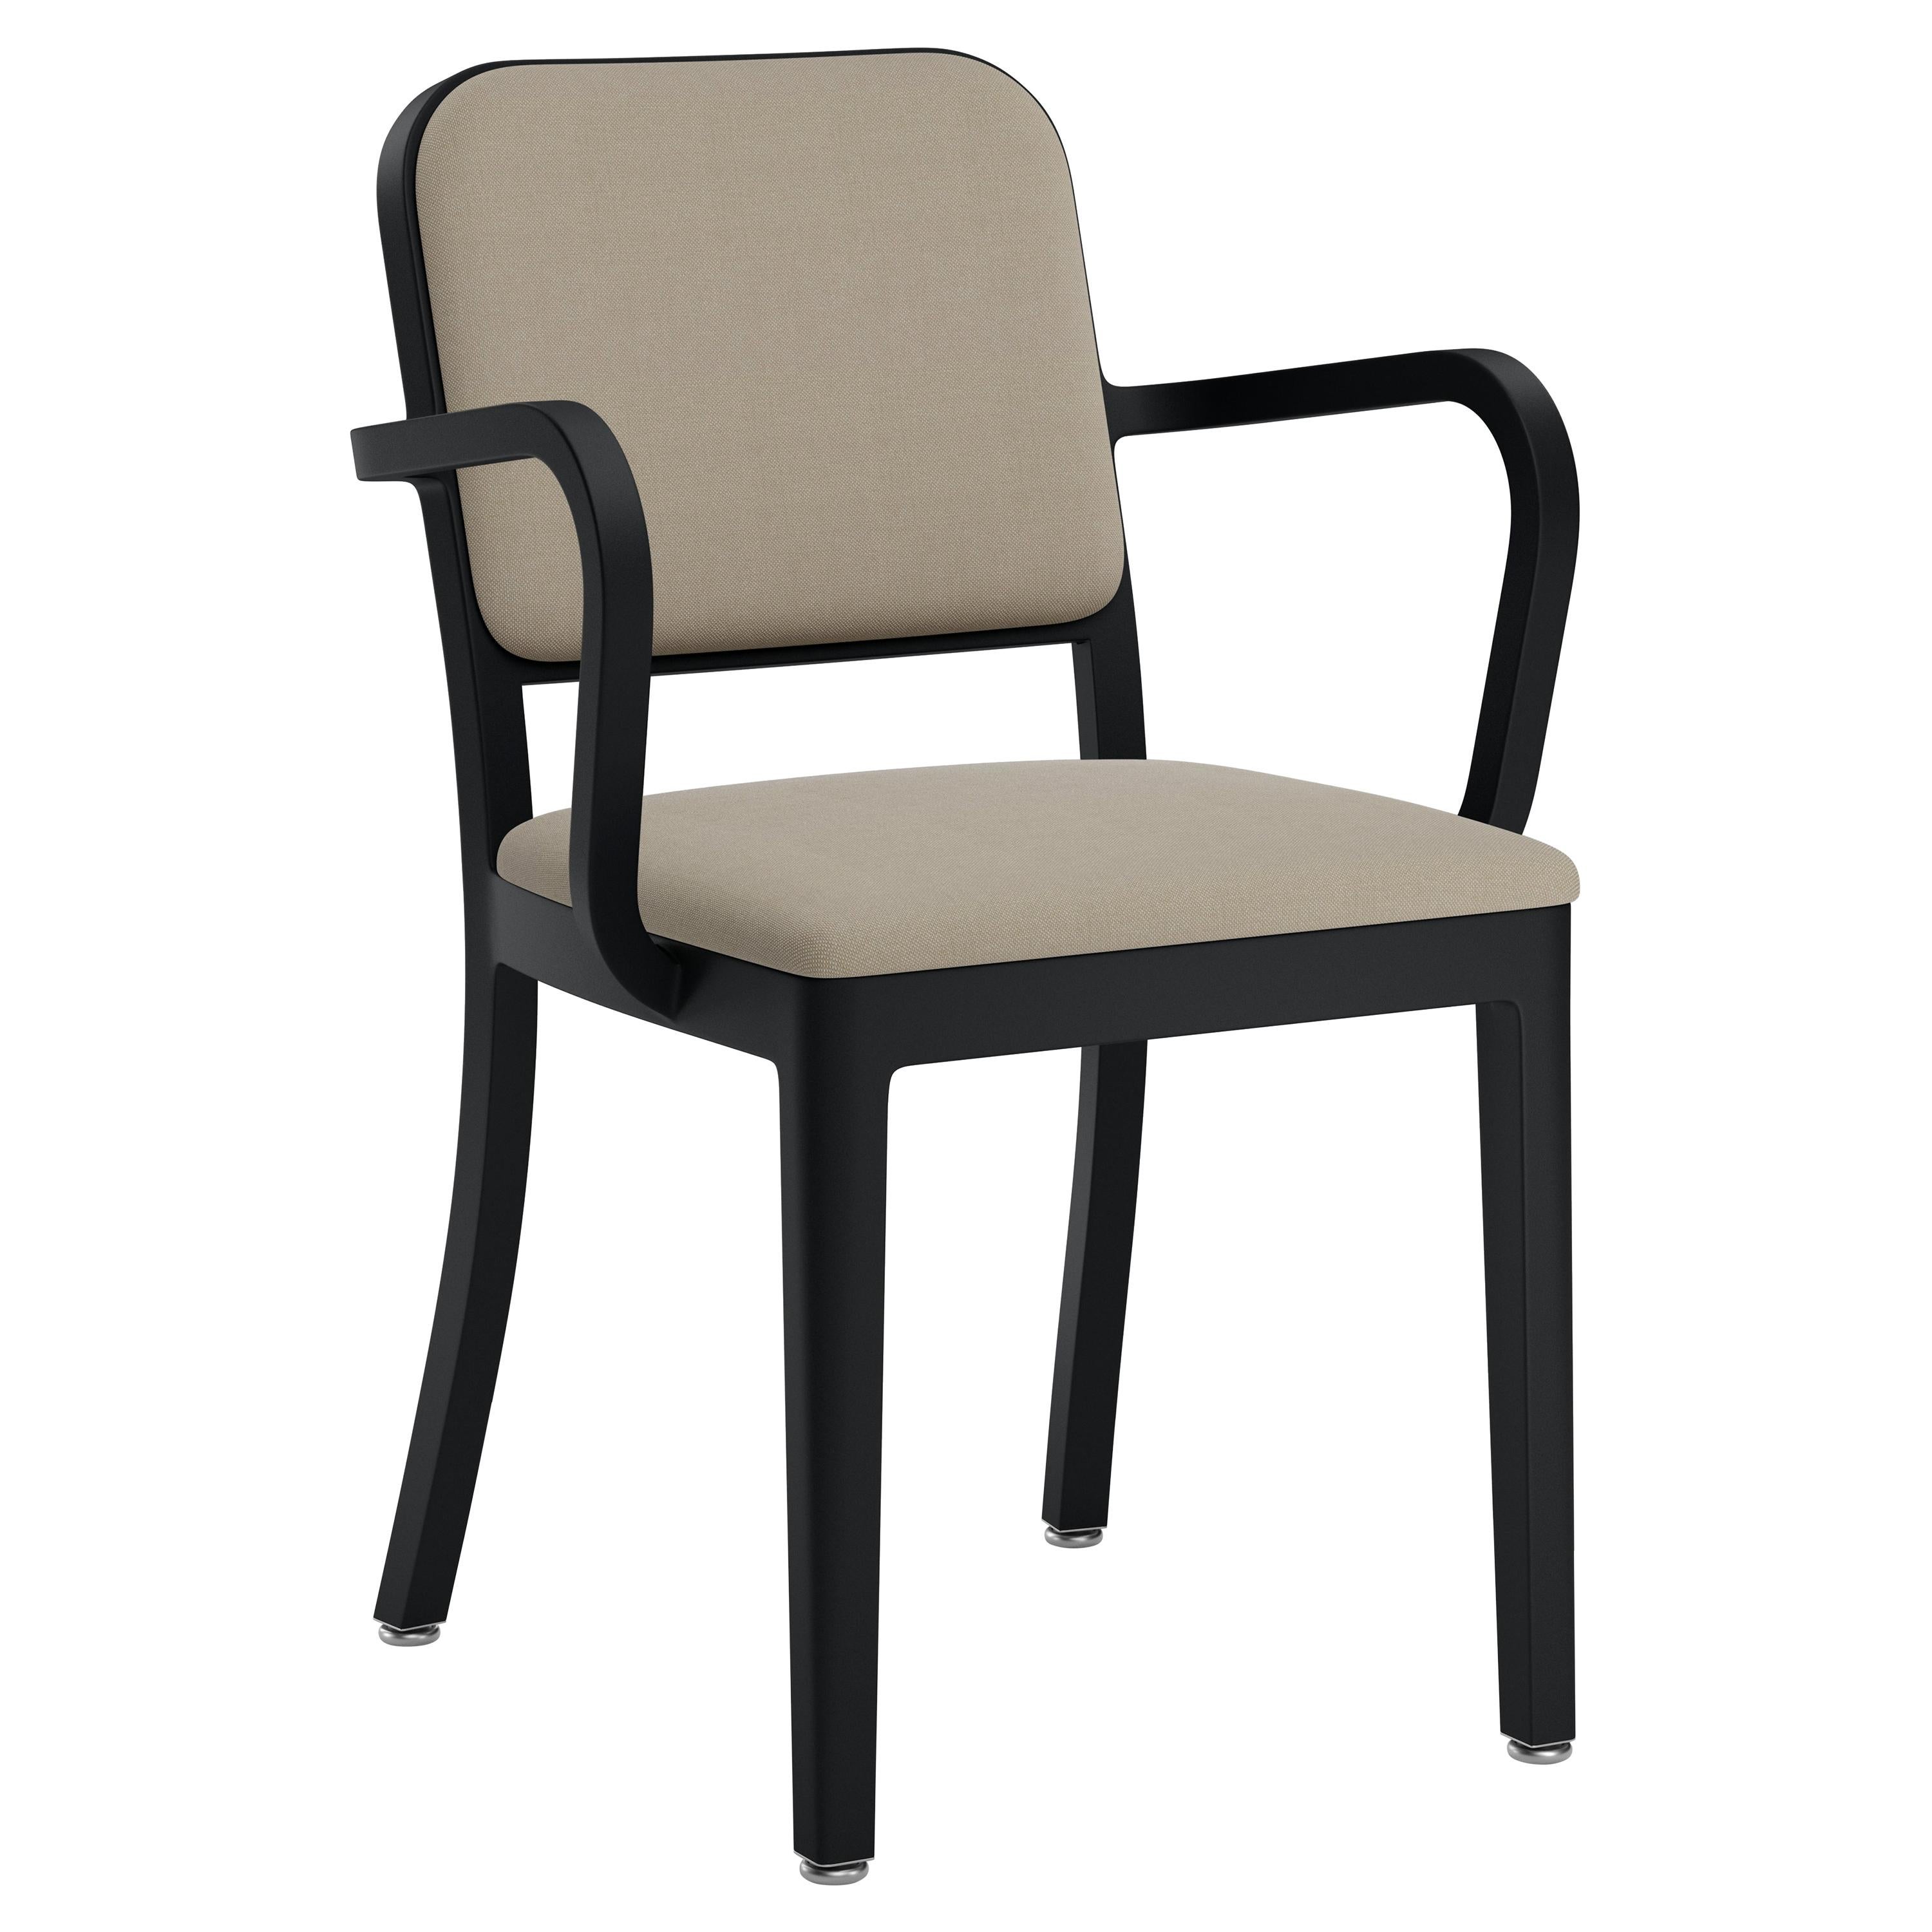 Emeco Navy Officer Armchair in Beige Fabric with Black Powder Coated Frame For Sale